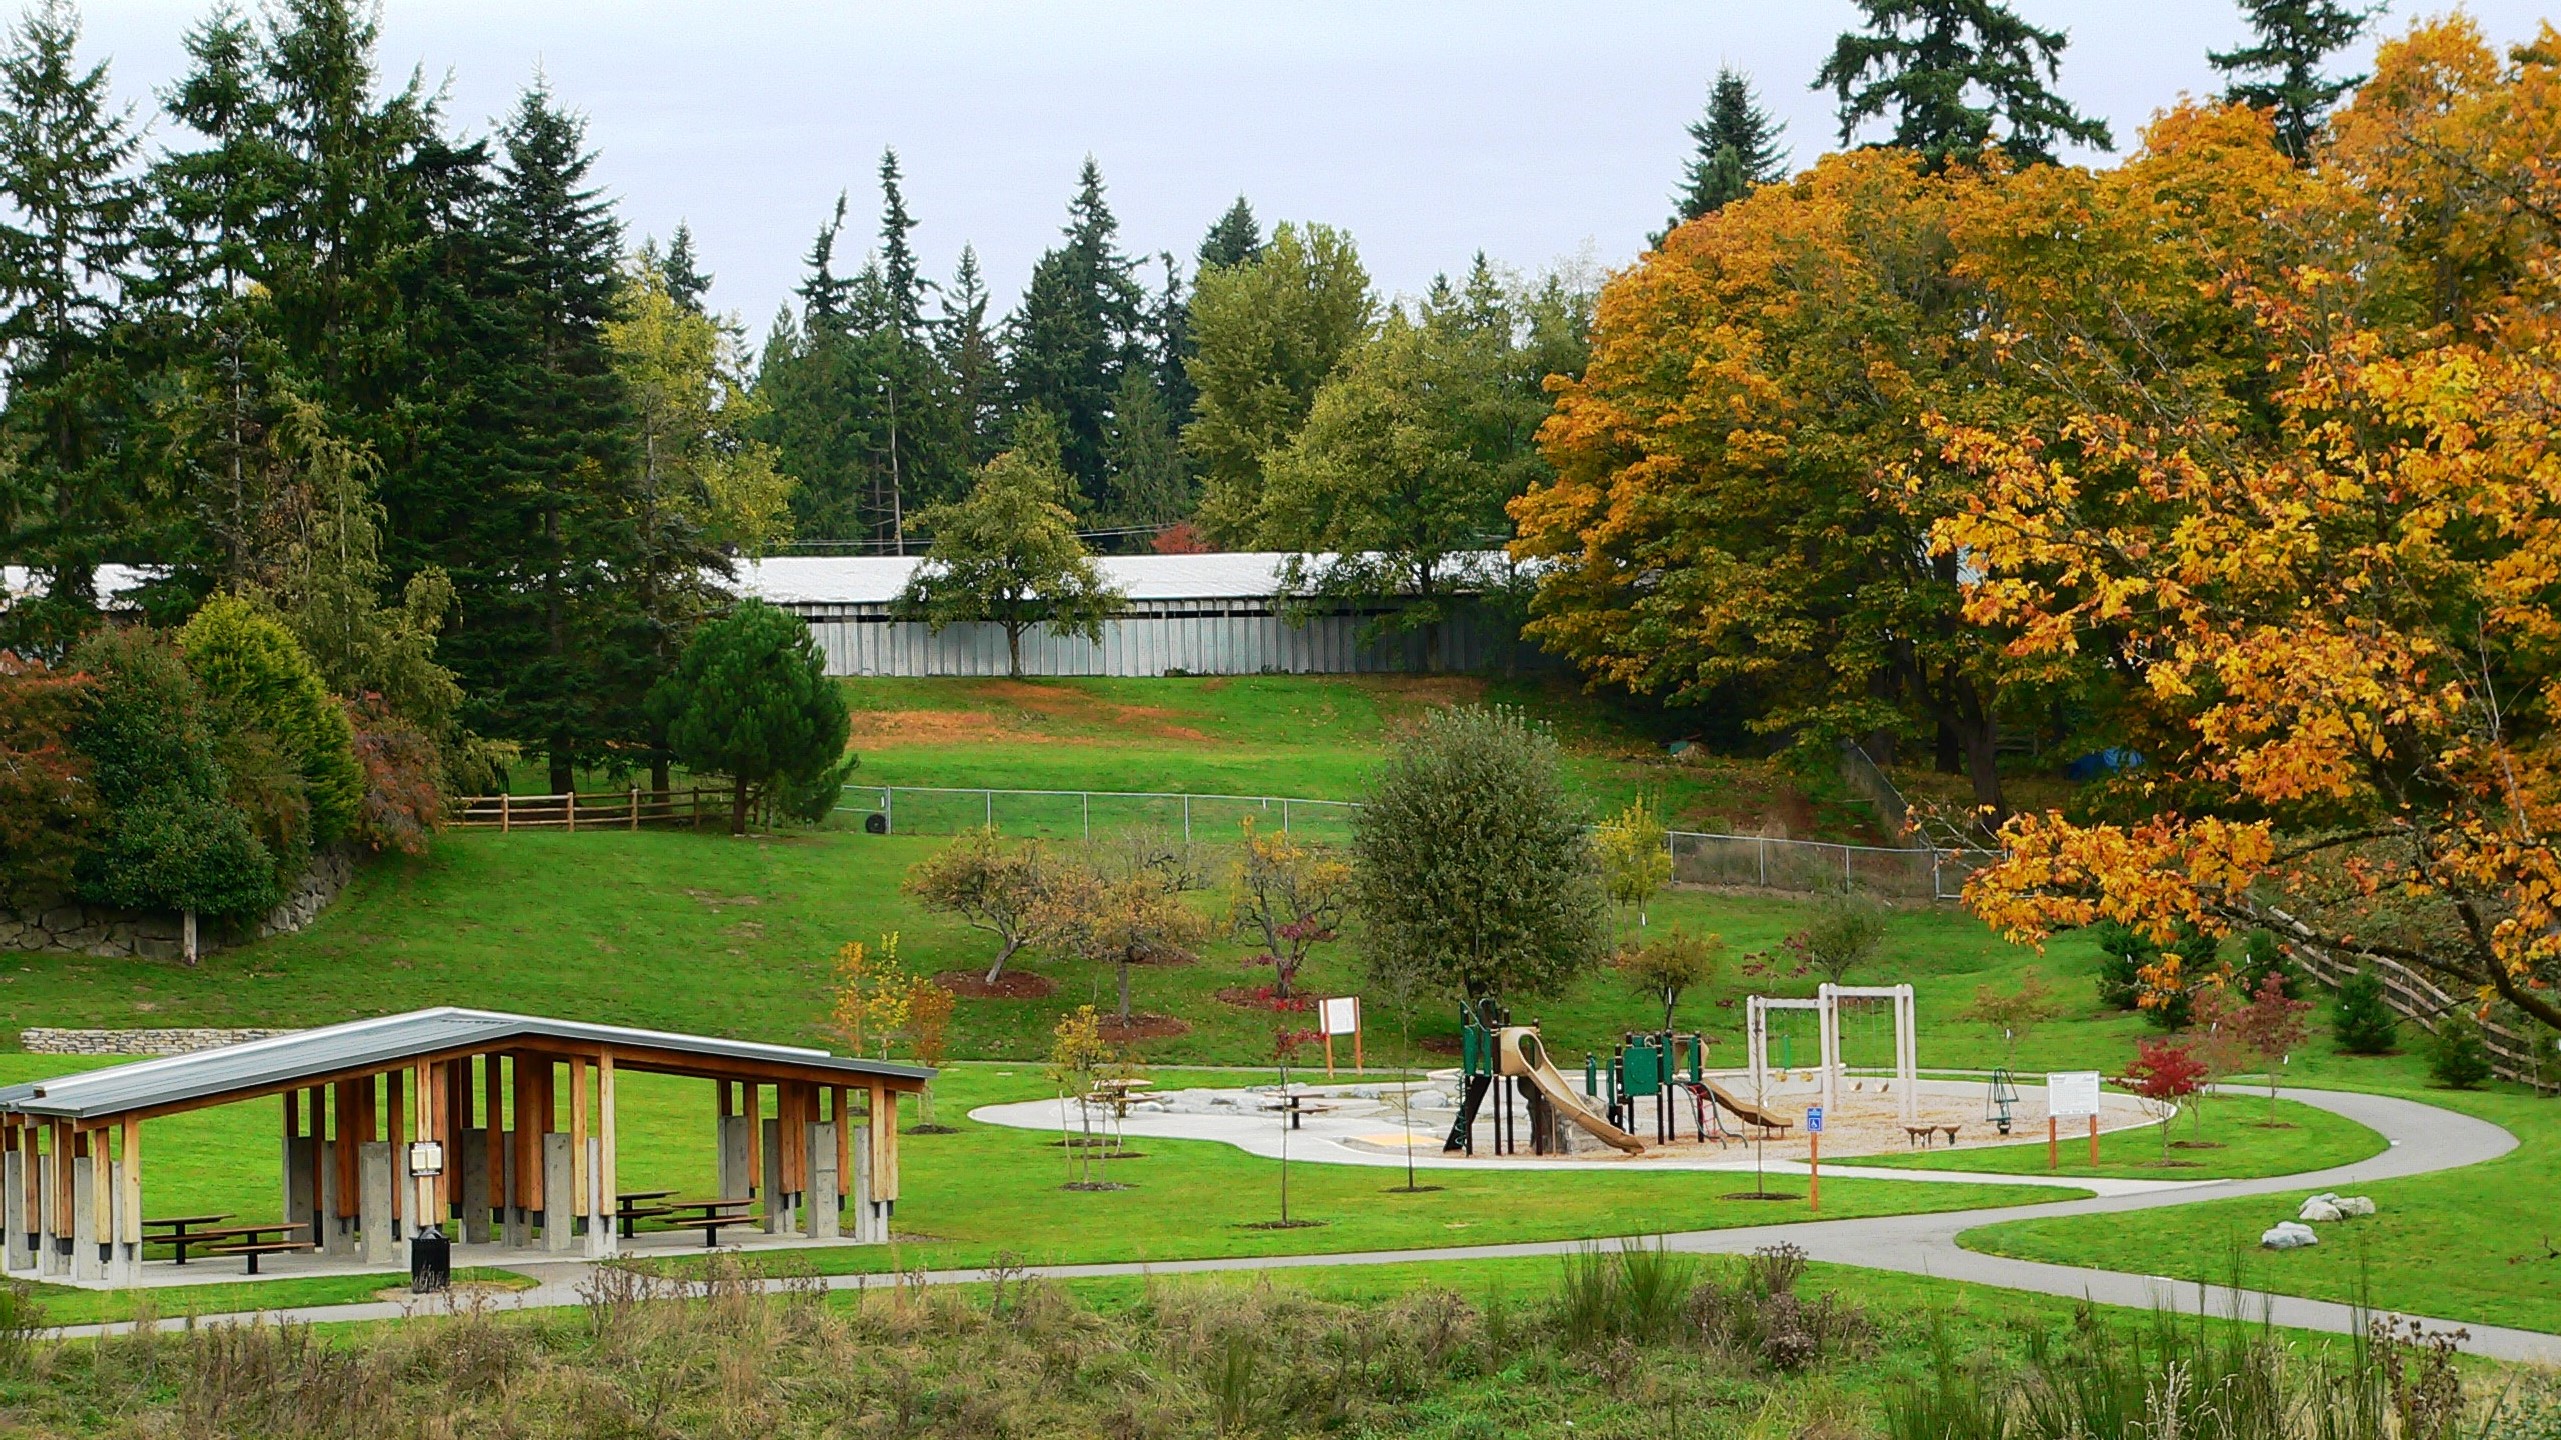 Covered picnic shelter with multiple picnic tables and children's playground with slides, swings, bars, and a variety of other playground equipment, surrounded by grassy areas which are then bordered by deciduous and coniferous trees. 